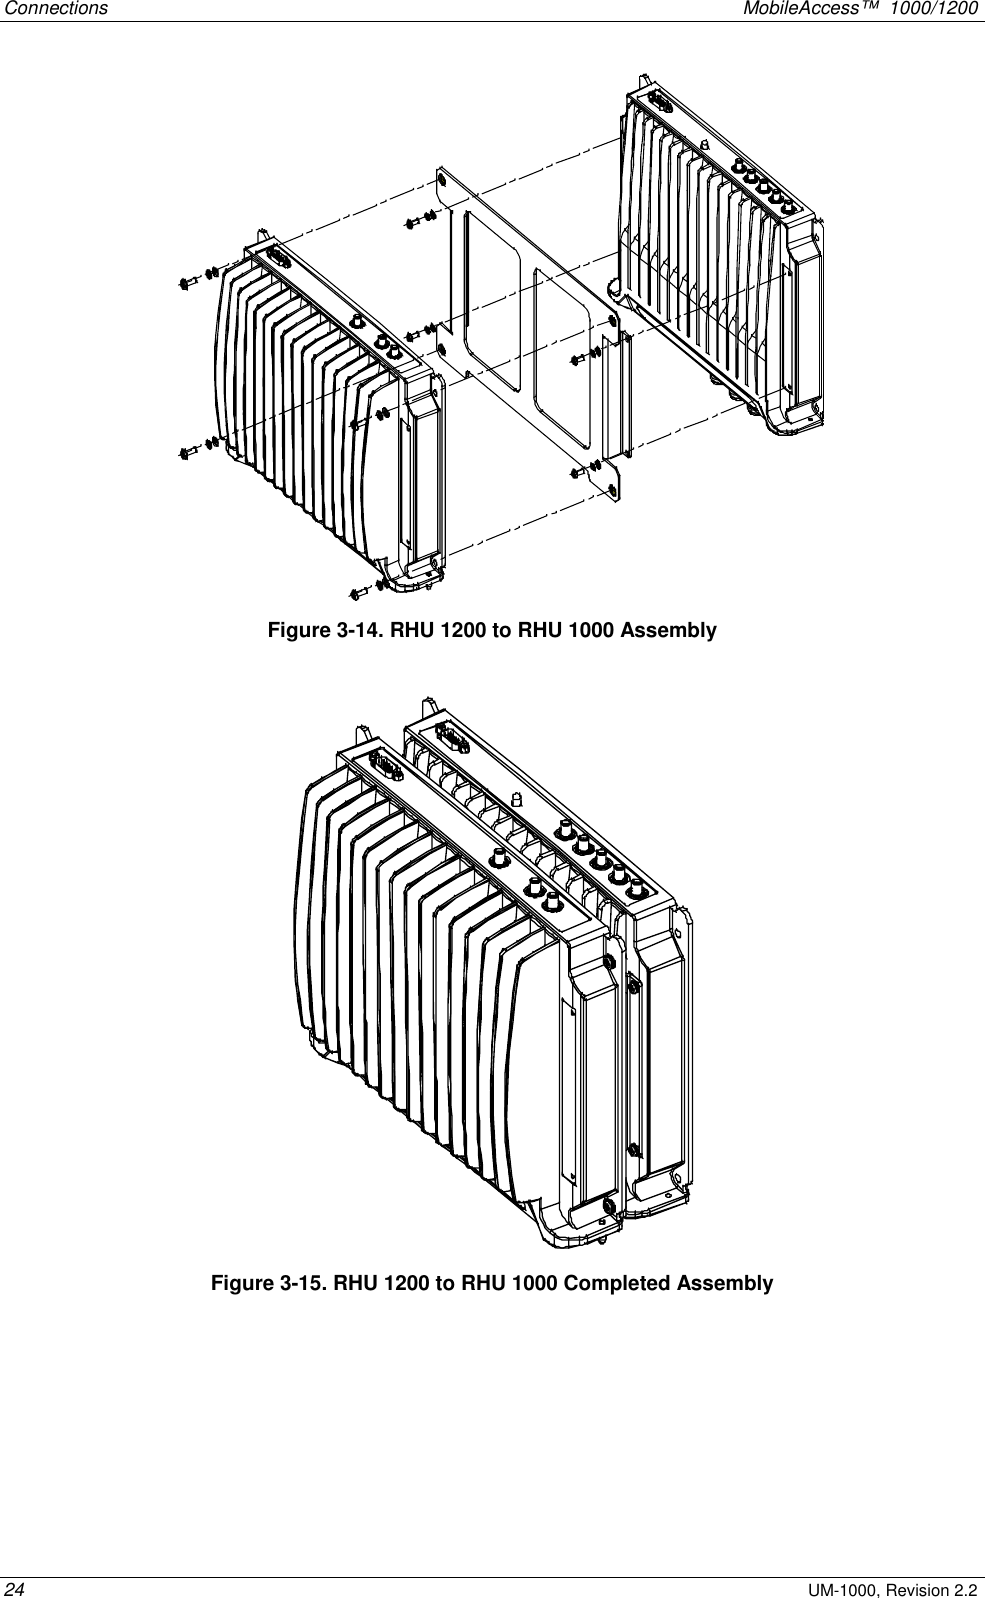 Connections    MobileAccess™  1000/1200 24 UM-1000, Revision 2.2  Figure  3-14. RHU 1200 to RHU 1000 Assembly   Figure  3-15. RHU 1200 to RHU 1000 Completed Assembly  